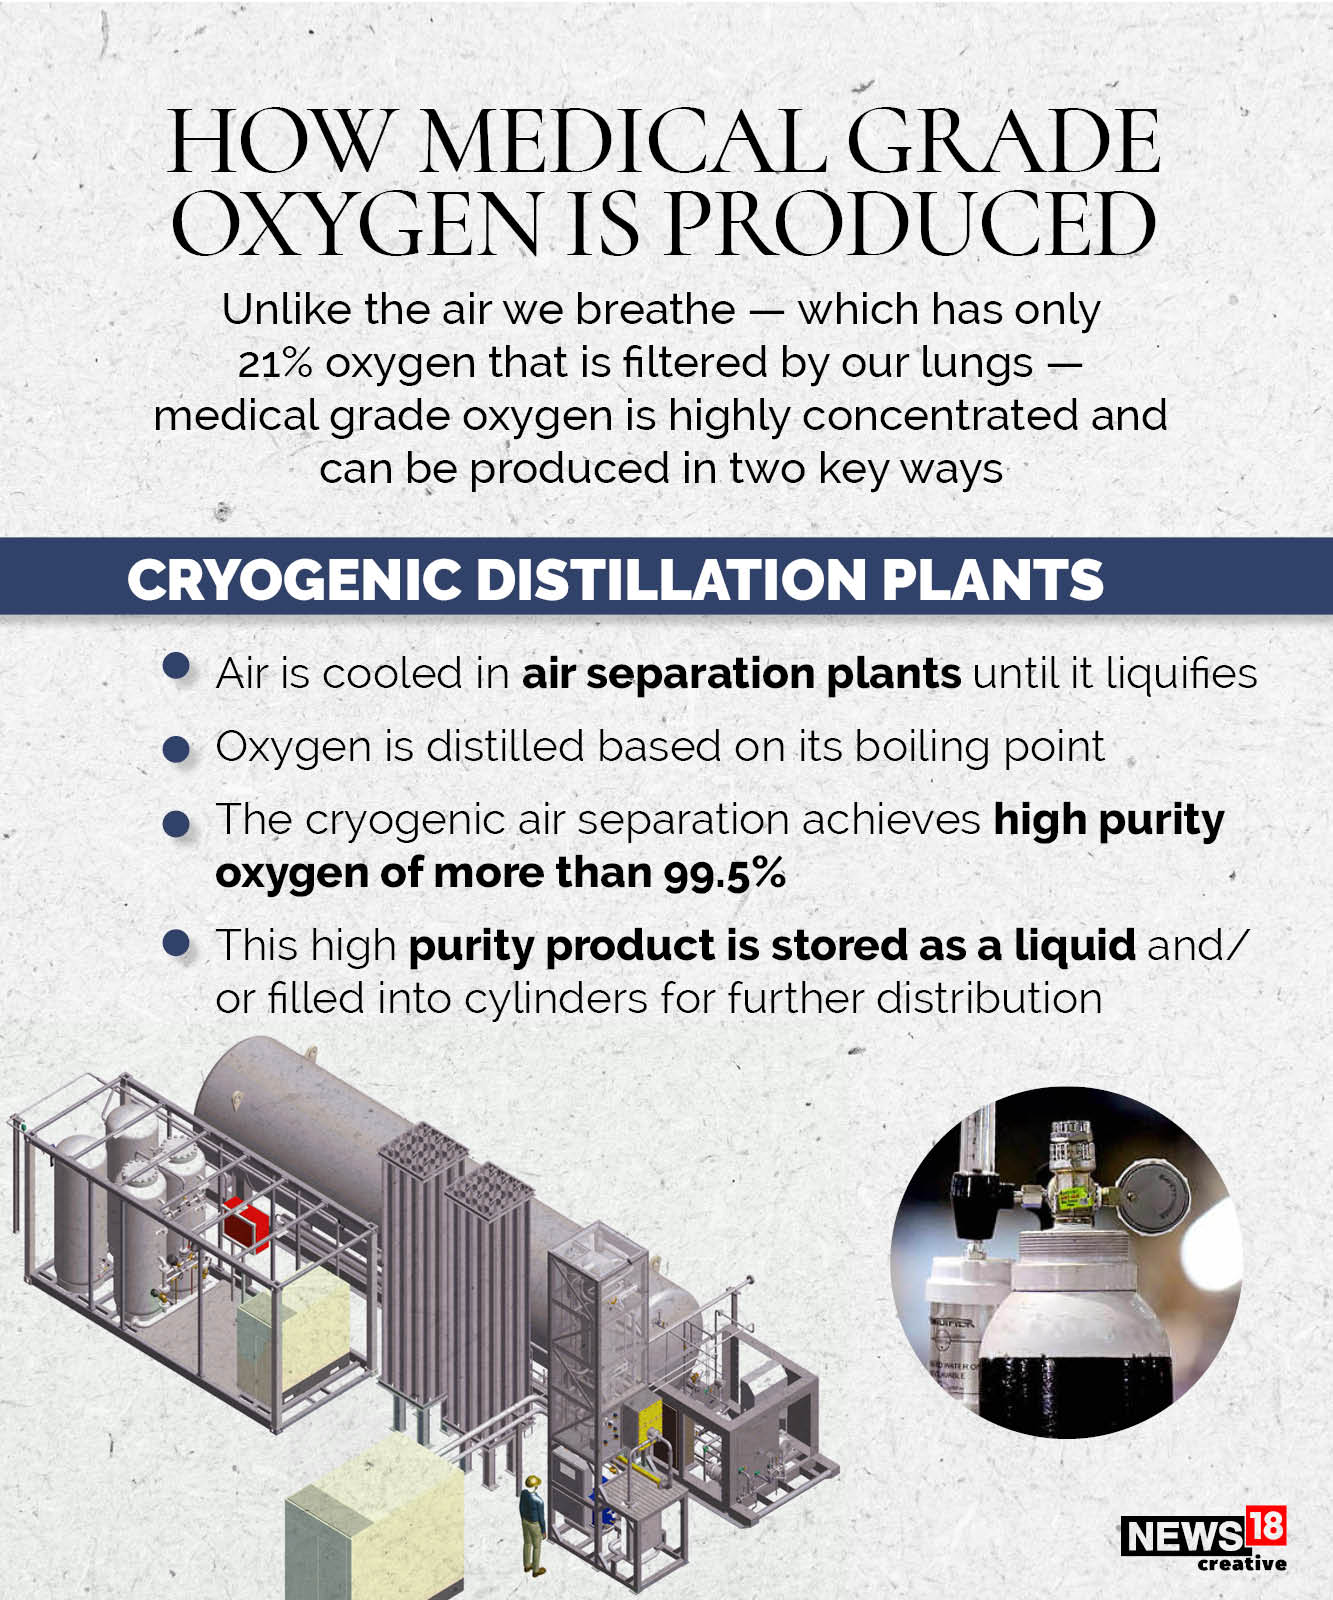 Covid-19: How medical grade oxygen is produced and distributed